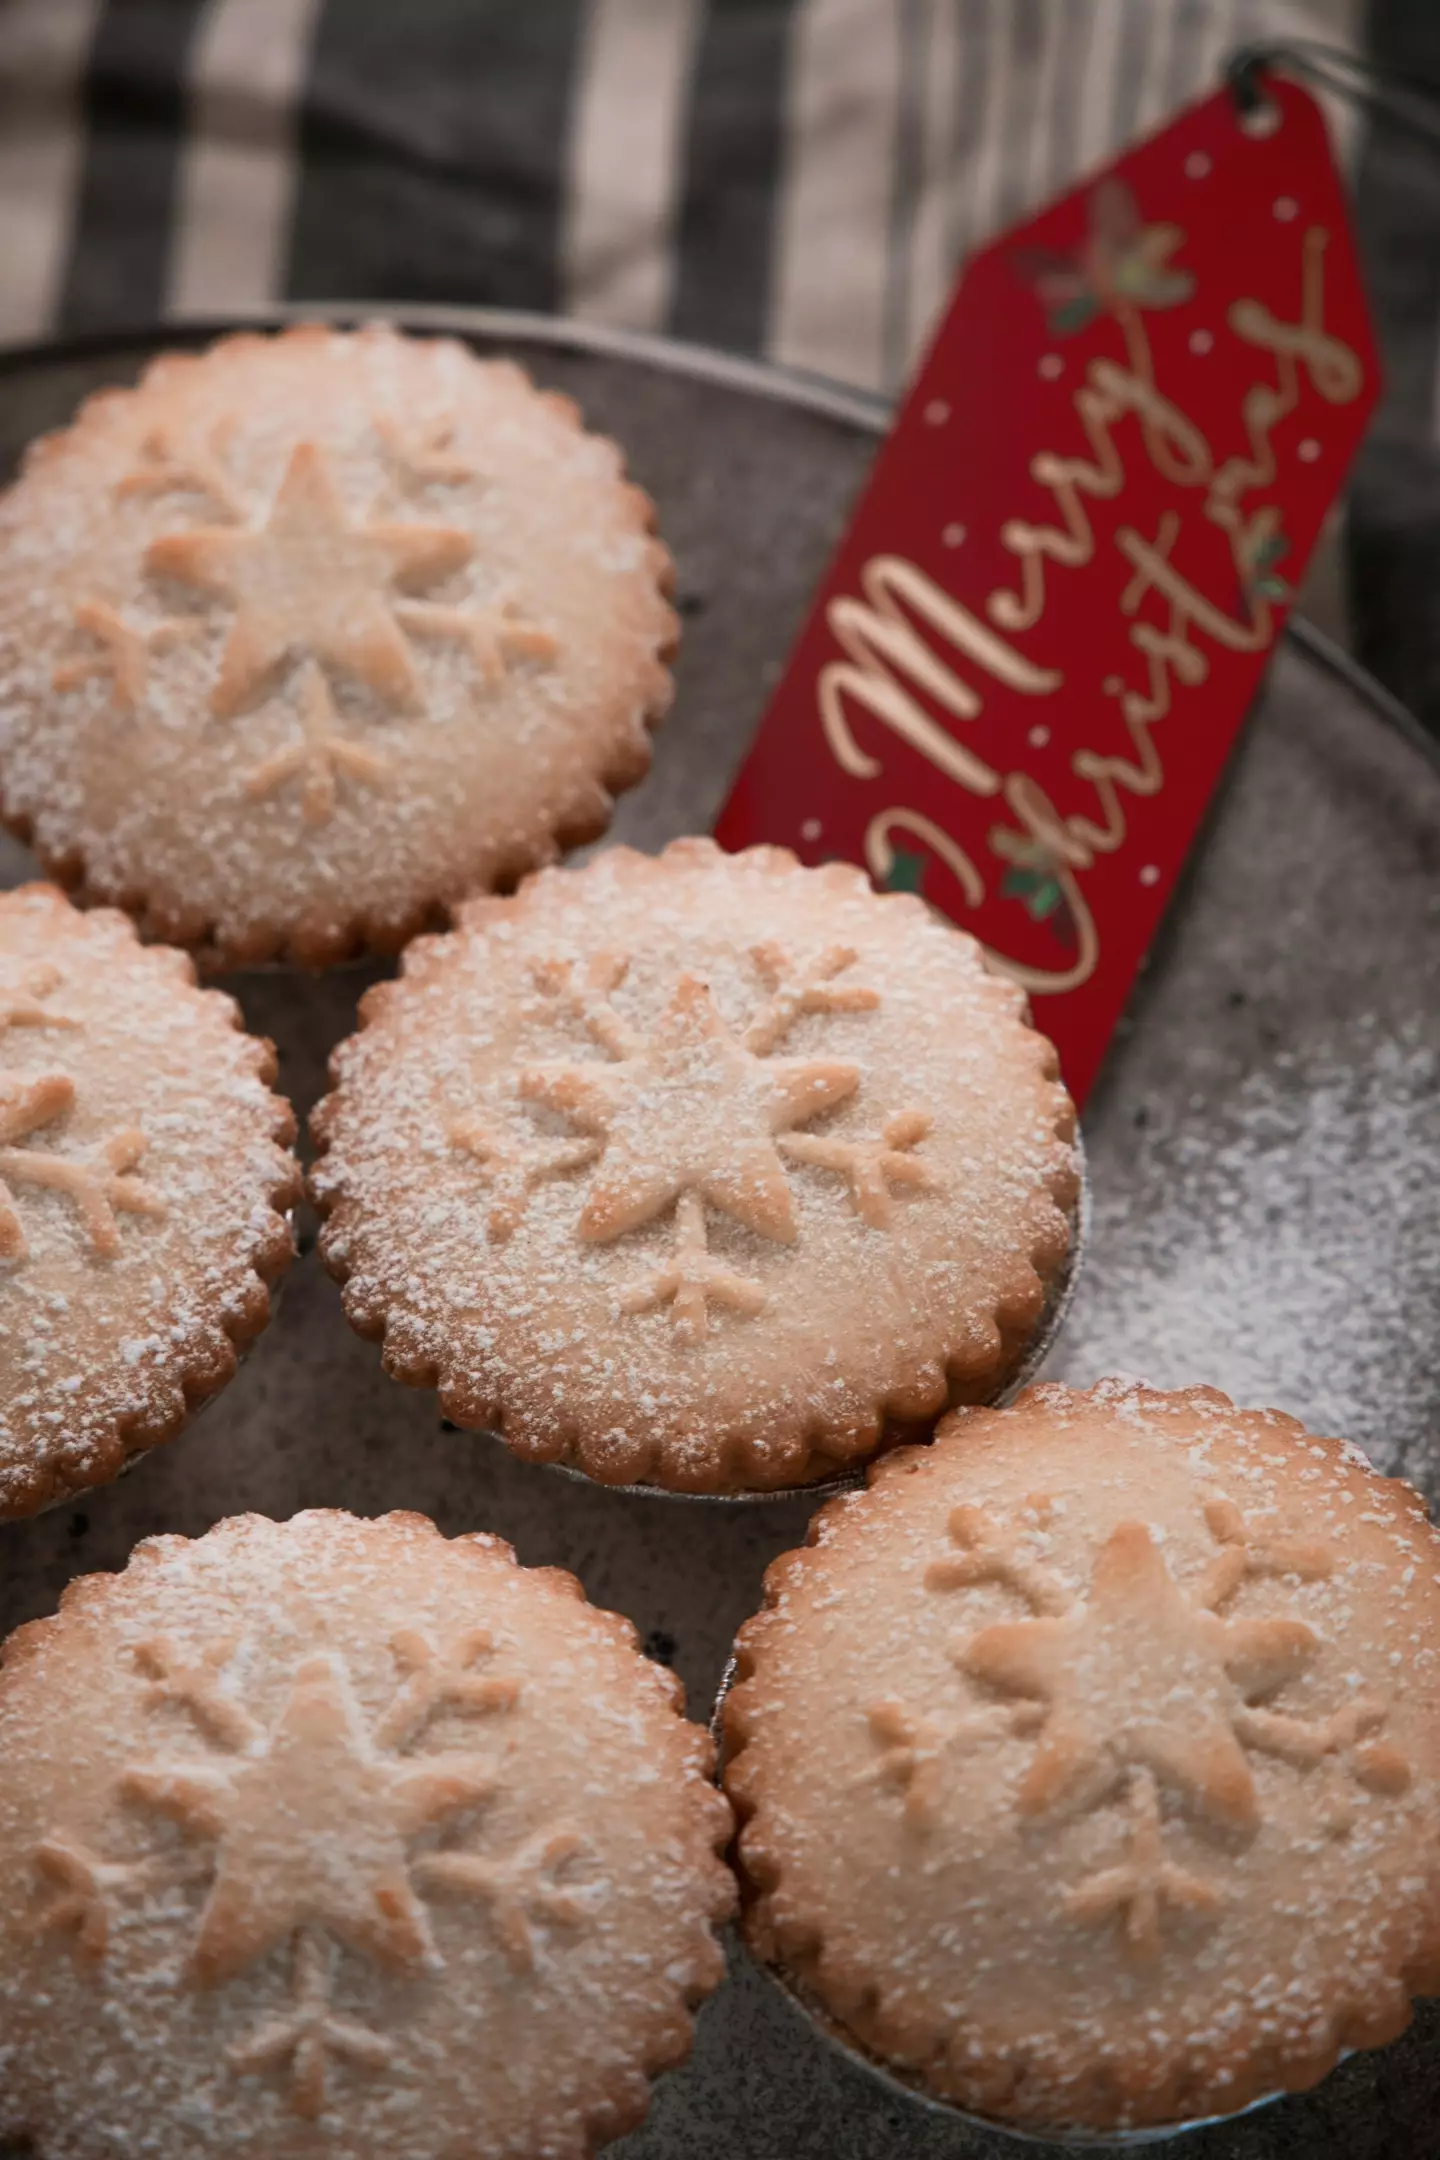 For many, Christmas doesn't start until they get the mince pies out.